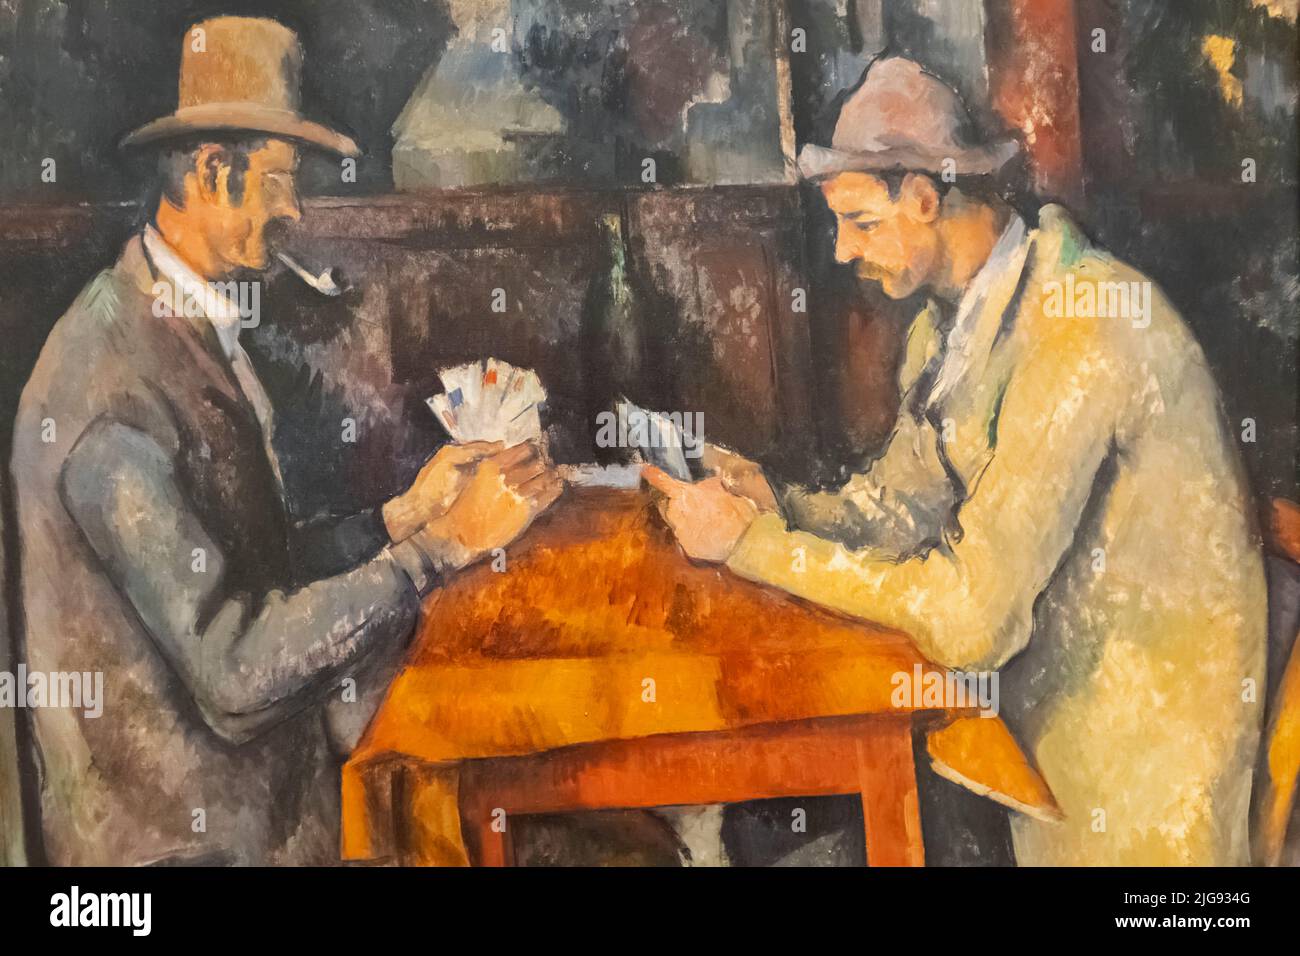 Inghilterra, Londra, Somerset House, The Courtauld Gallery, dipinto dal titolo "The Card Players" di Paul Cezanne del 1892 Foto Stock